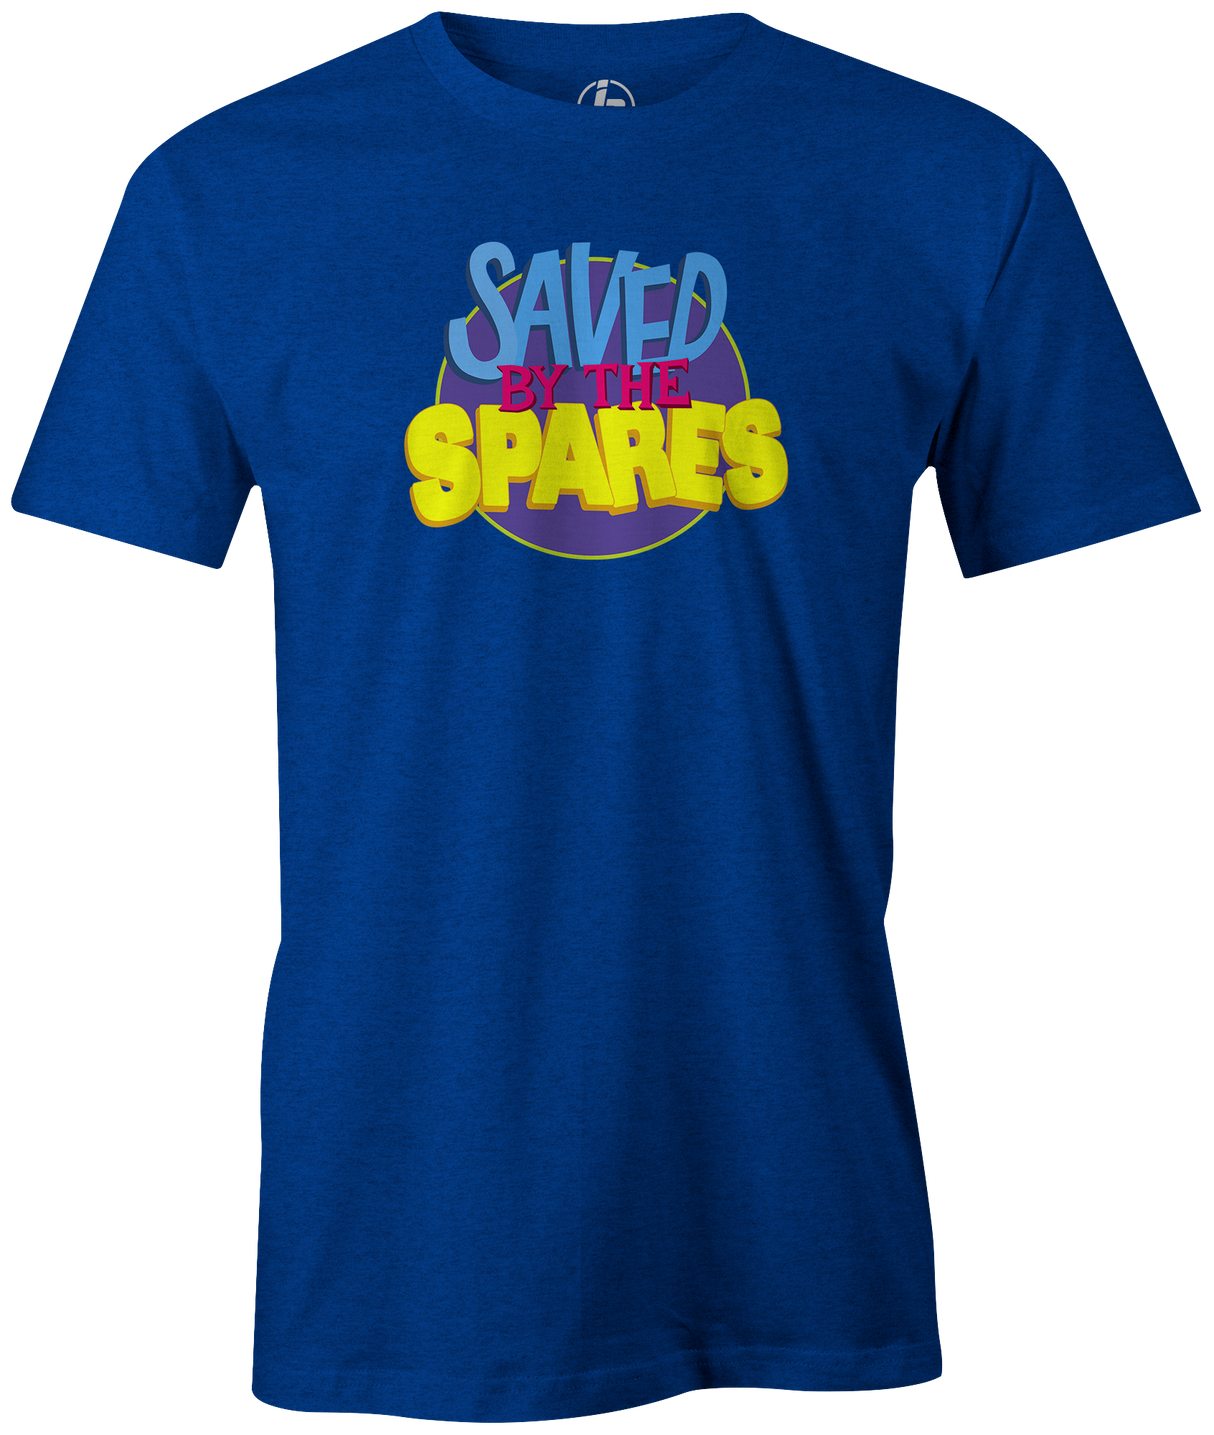 It's never been more true...Spares are KEY. Your game will be Saved By The Spares! Saved By the Bell tshirt tee t-shirt. Zack Morris, Kelly Kapowski, AC Slater, Screech Powers, Lisa Turtle, Jesse Spano, Mr. Belding. Bowling League Night Spares Strikes gutter friends family bowler funny novelty tv television 80s 90s teen. blue